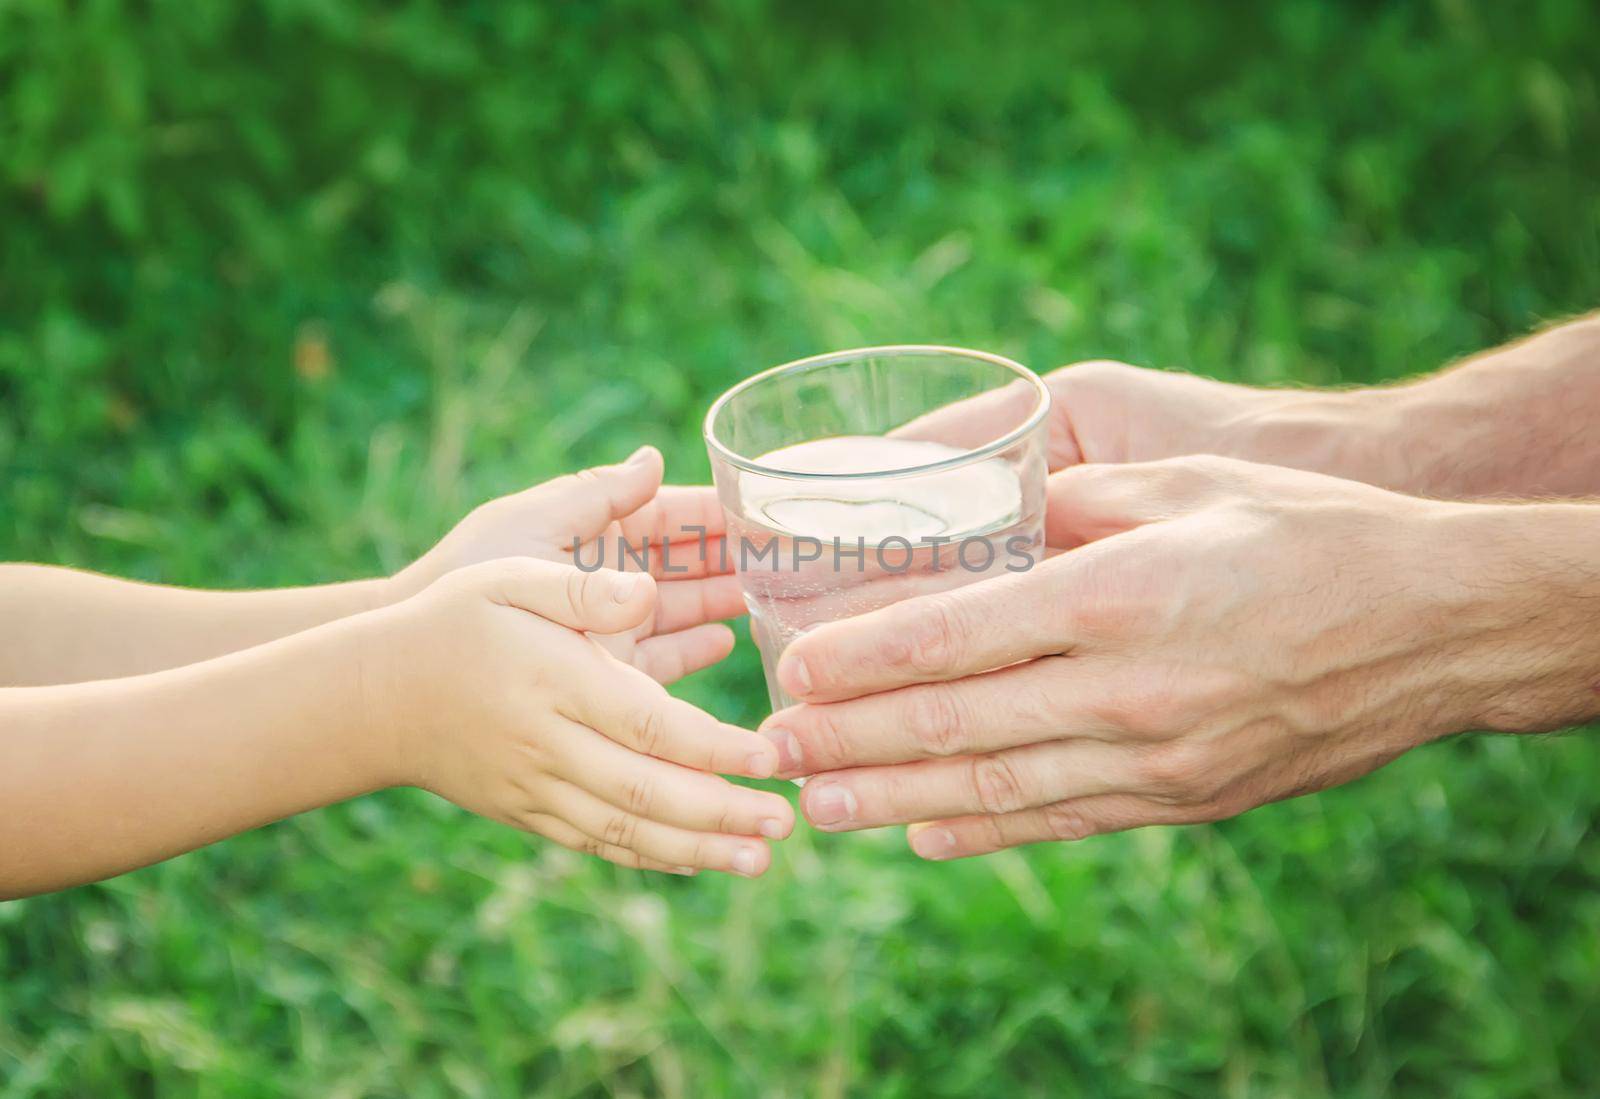 The father gives the child a glass of water. Selective focus.